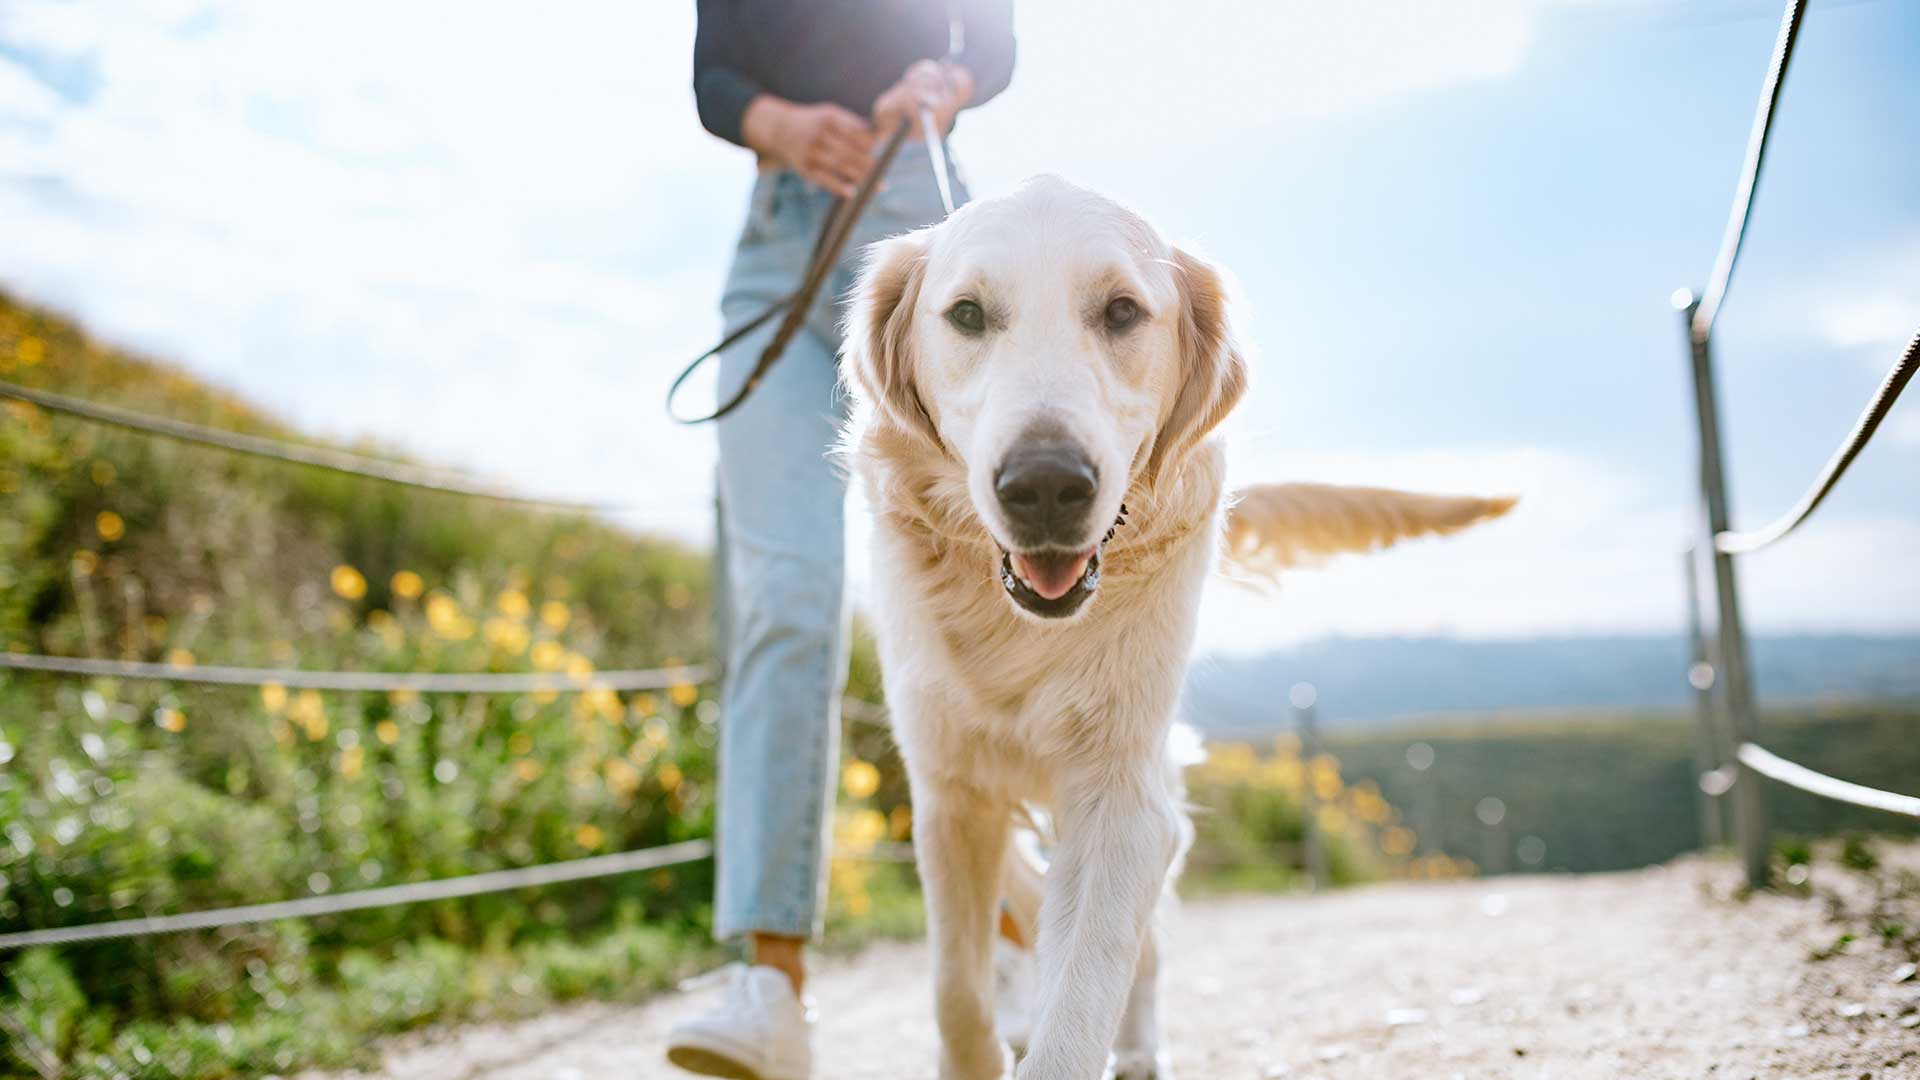 A golden retriever on a leash happily walking towards the camera on a sunny path with its owner partially visible in the background.